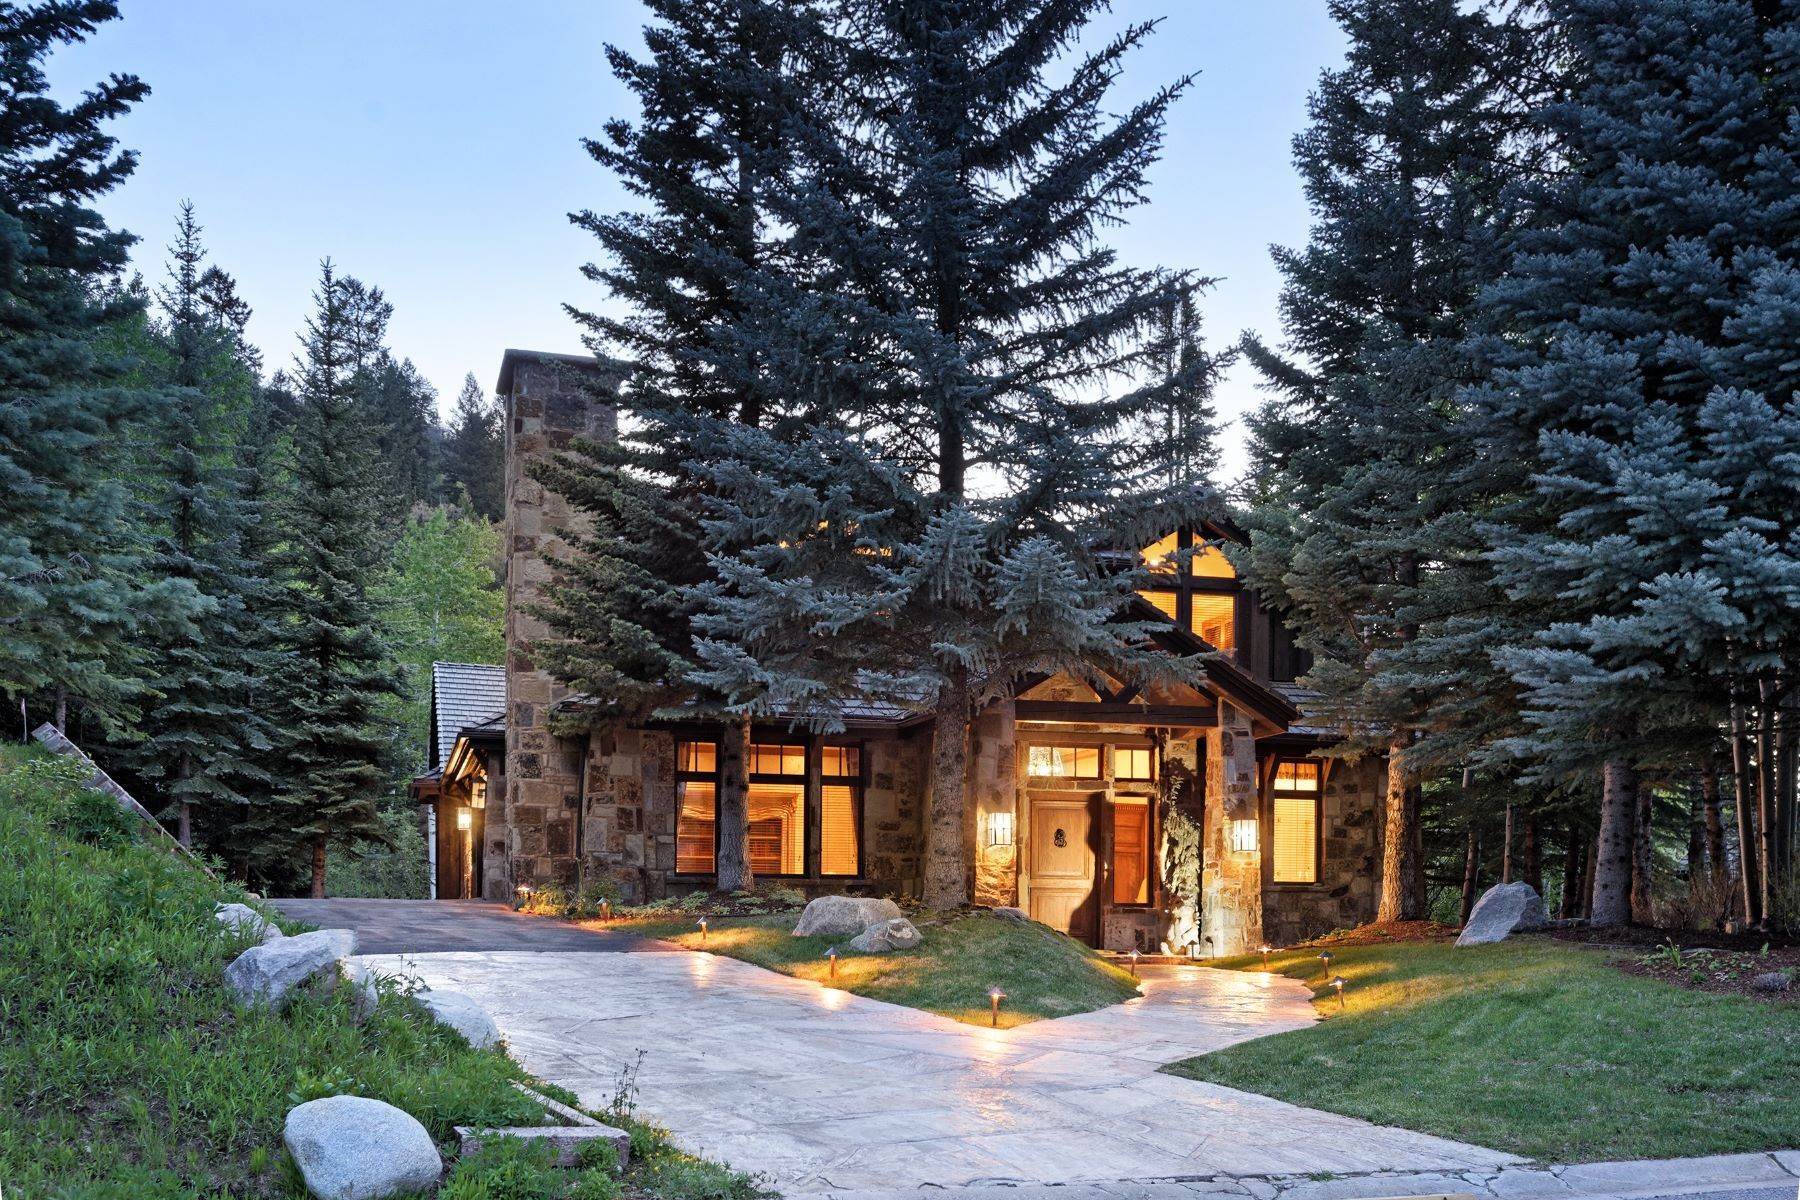 Property for Sale at Maroon Creek Club 81 N Willow Court Aspen, Colorado 81611 United States